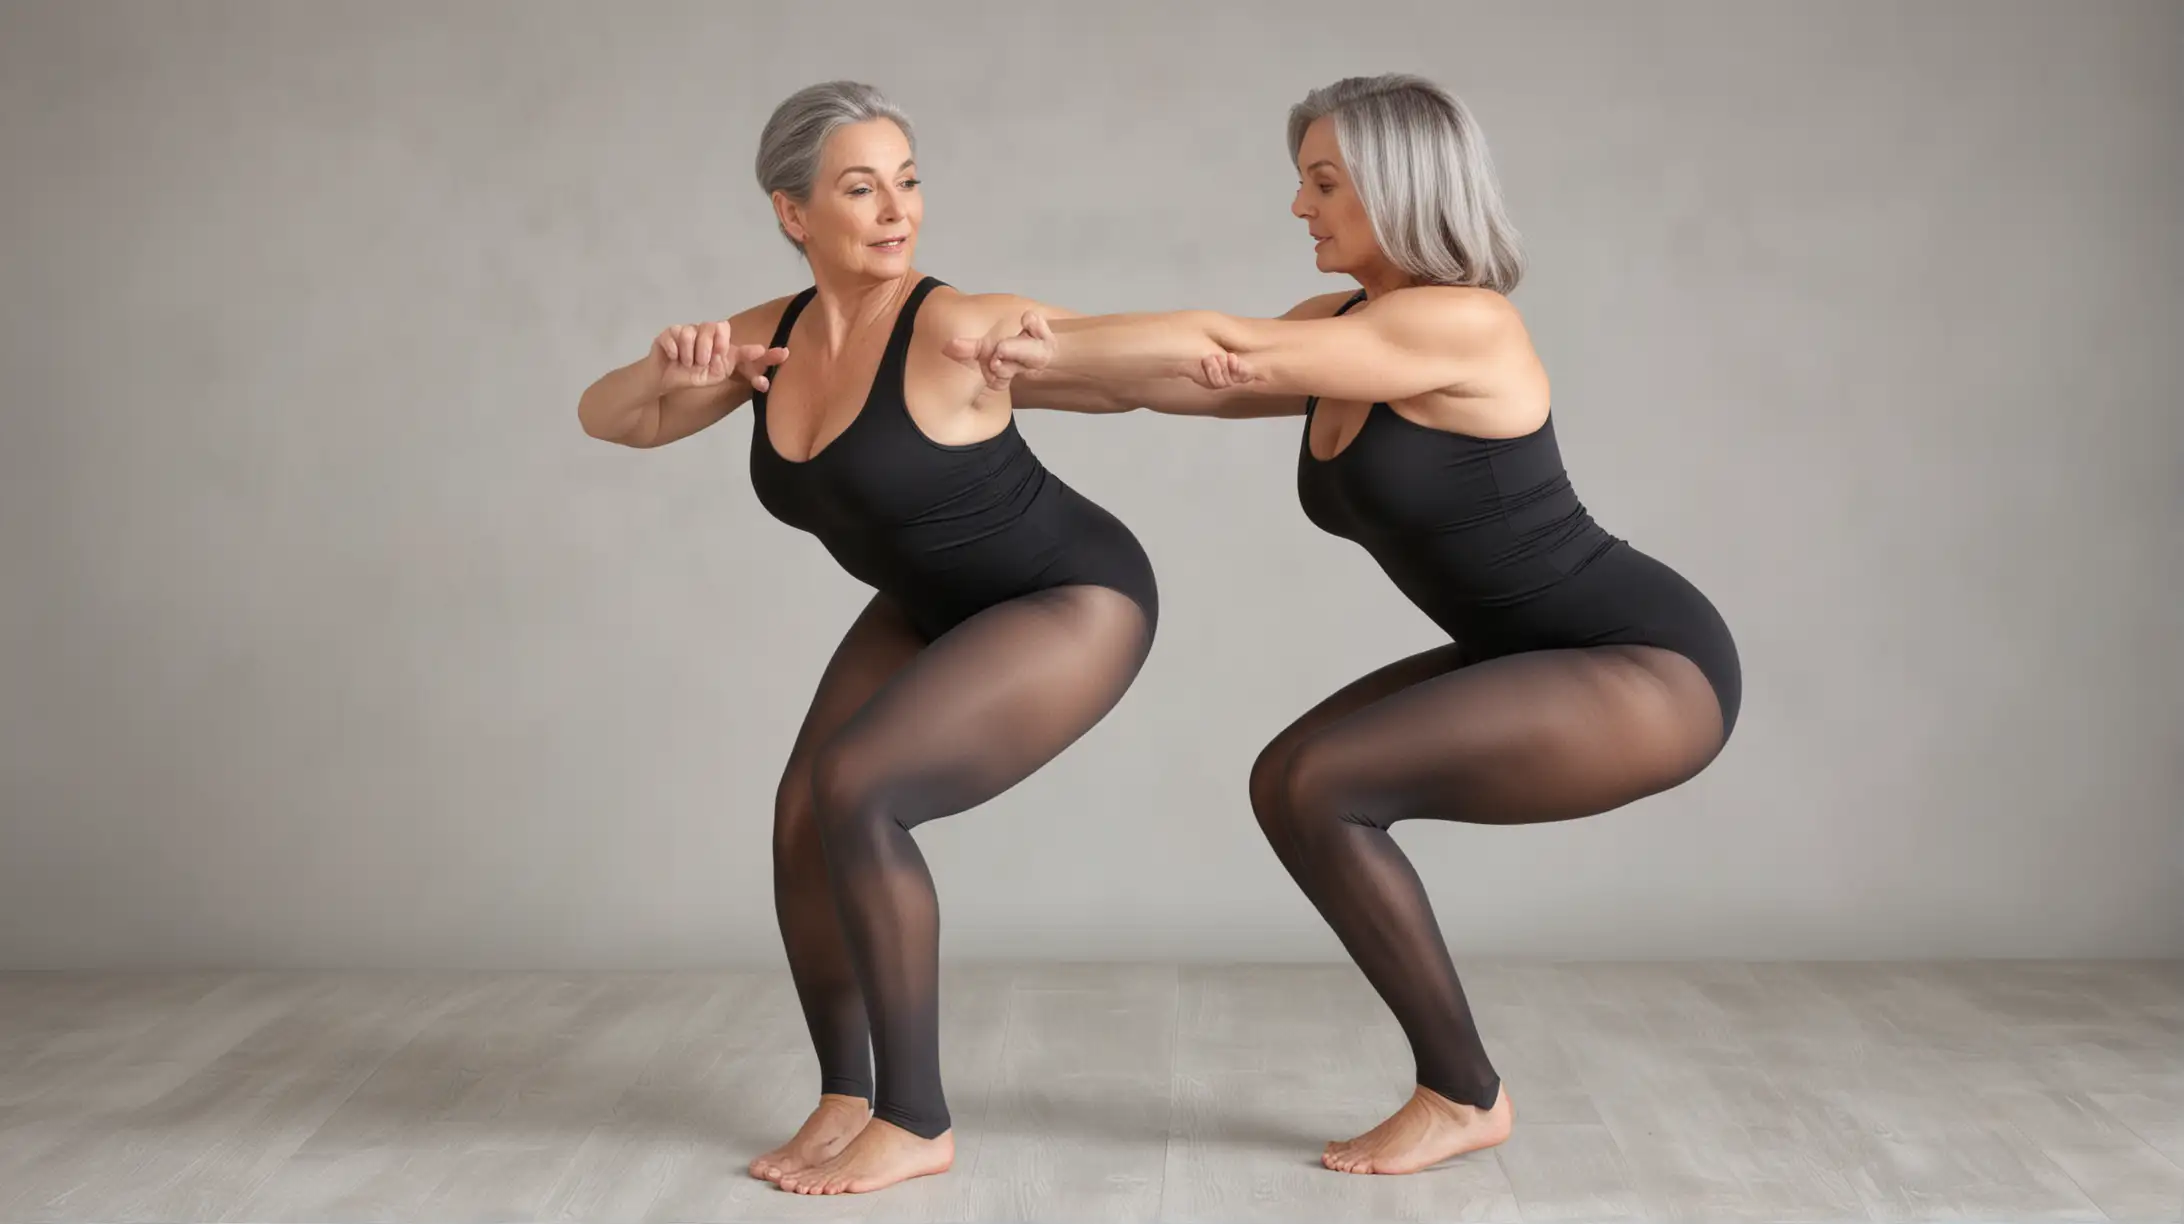 Mature Woman Doing Squats in Black Leotard and Gray Pantyhose